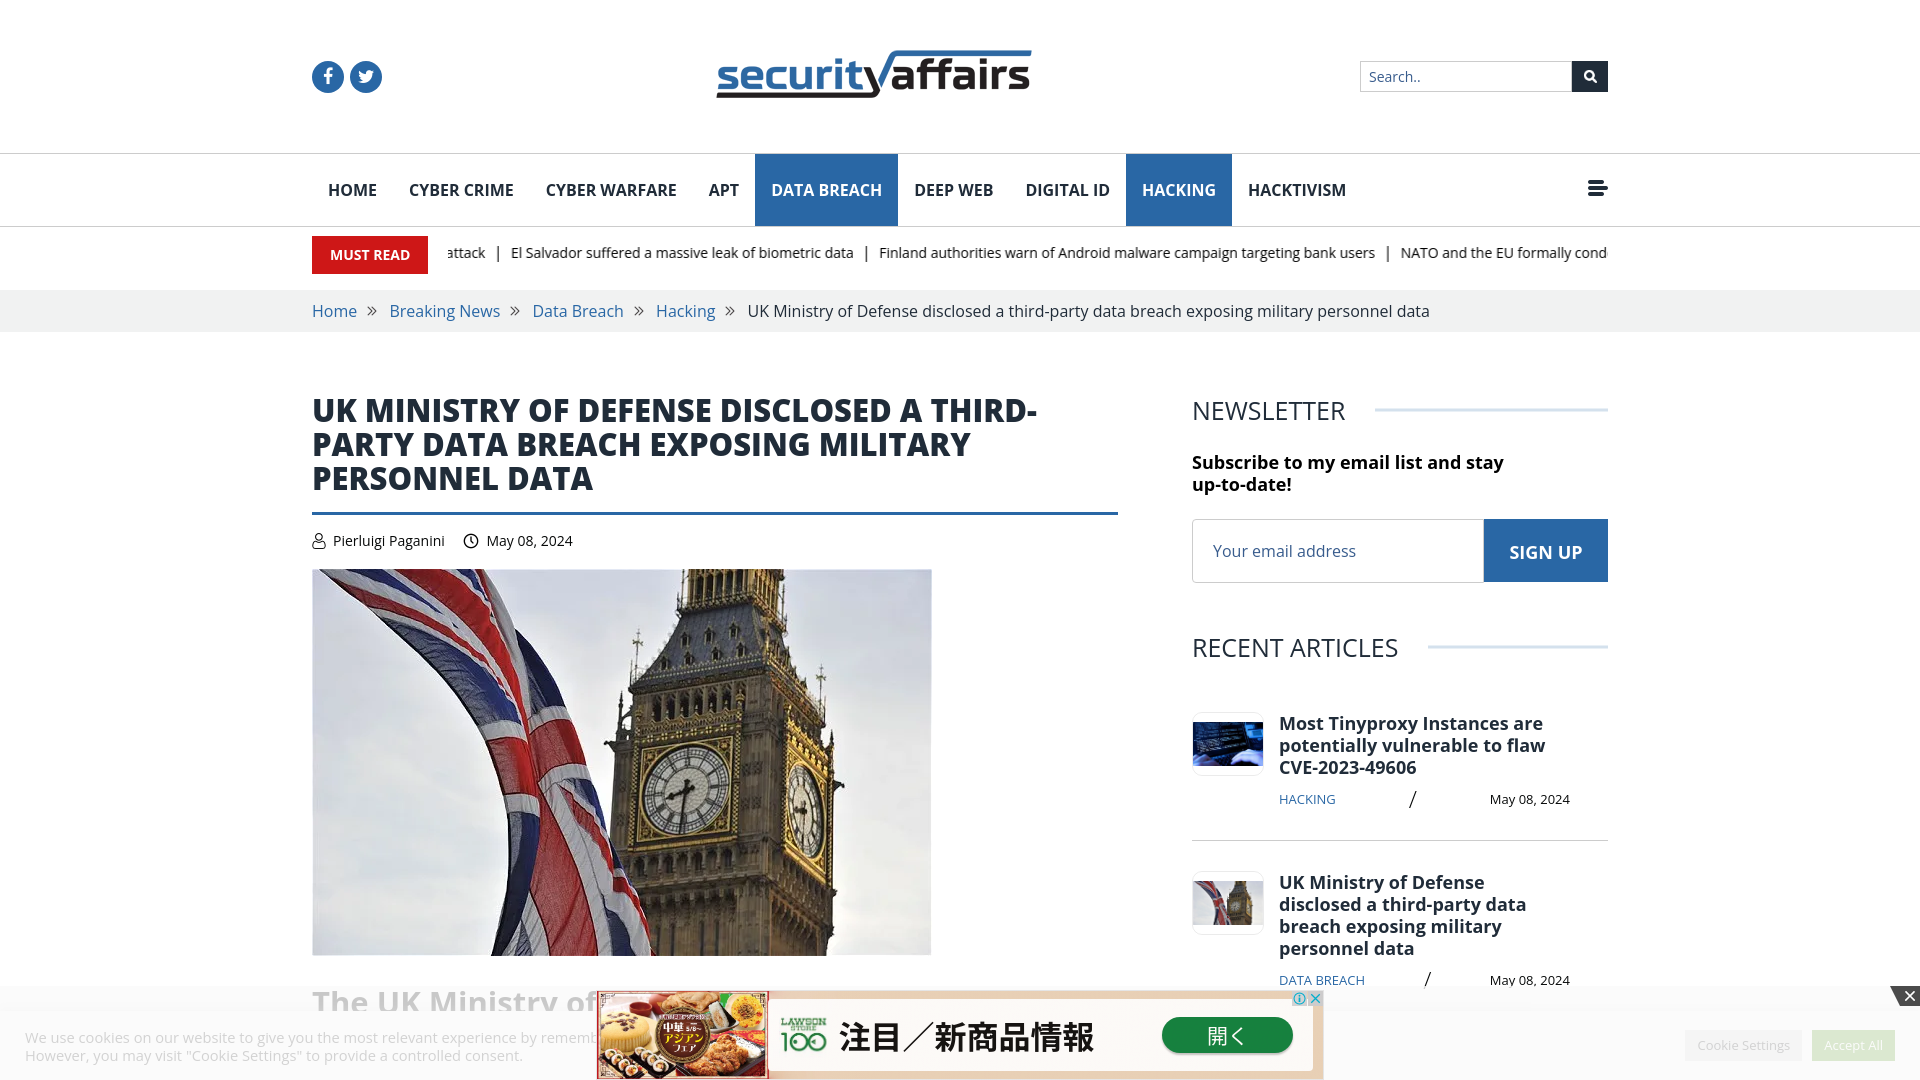 UK Ministry of Defense disclosed a third-party data breach exposing military personnel data 